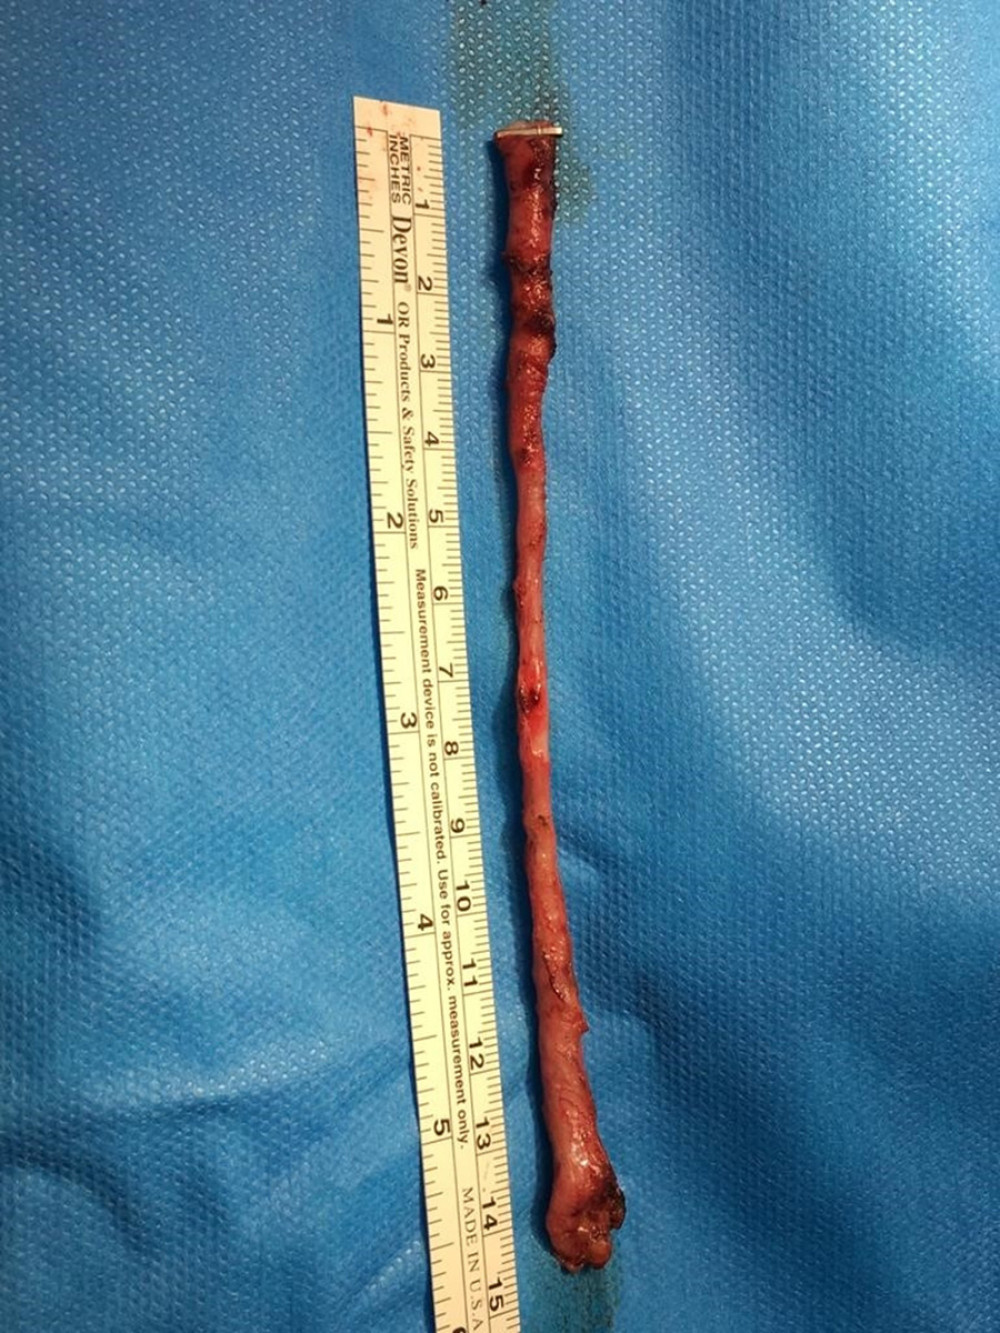 The surgically removed blind-ending bifid ureter.